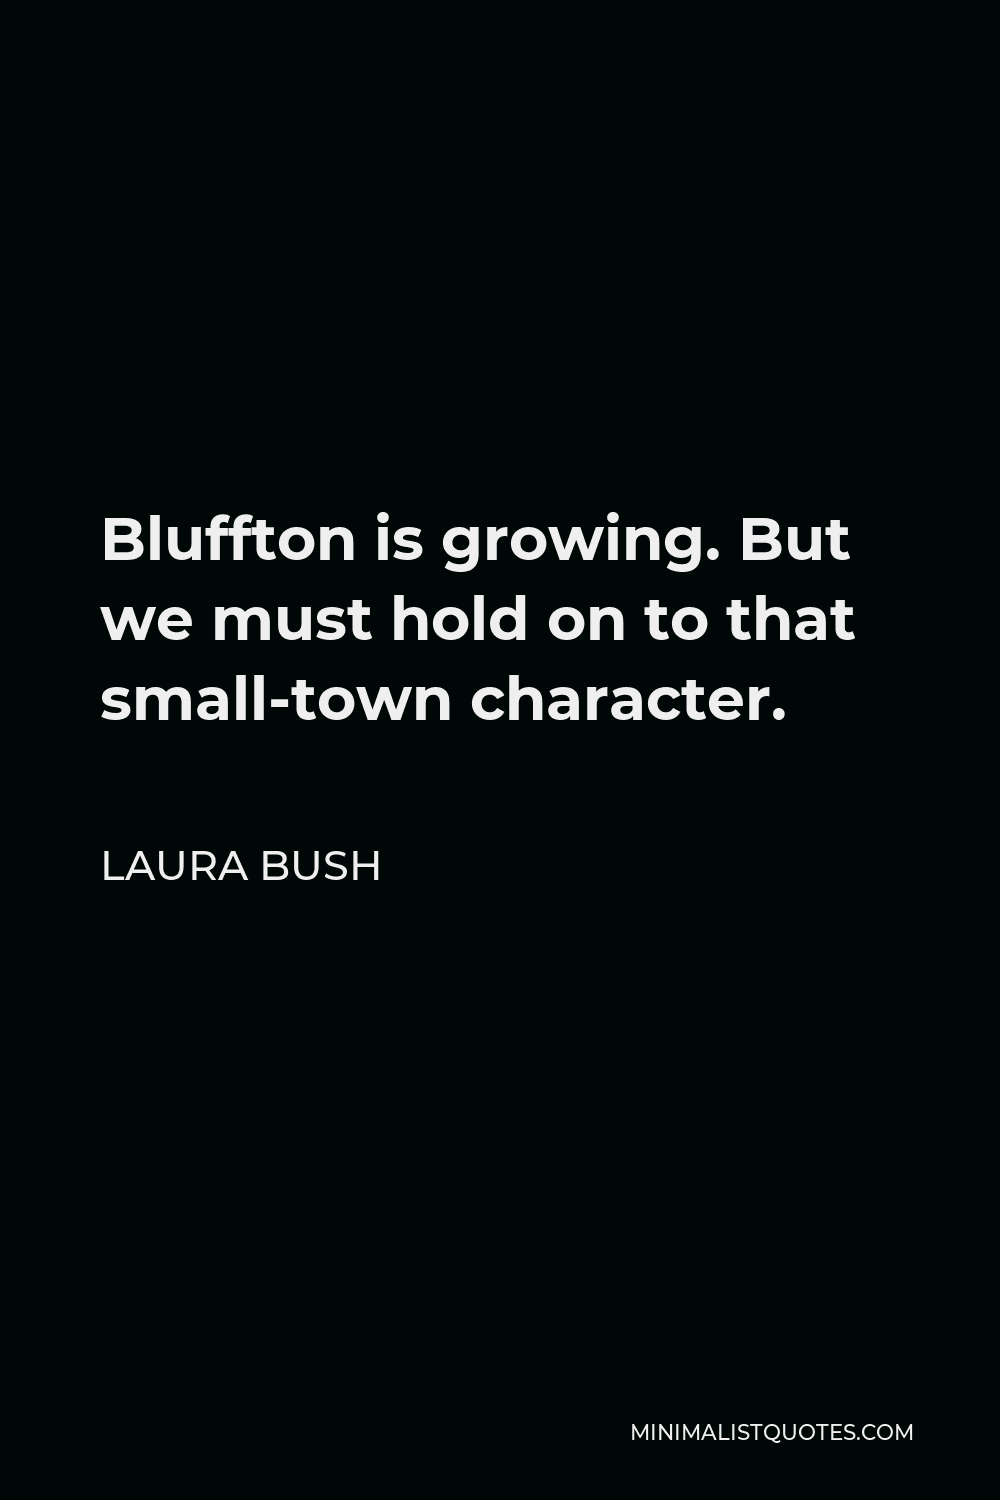 Laura Bush Quote - Bluffton is growing. But we must hold on to that small-town character.